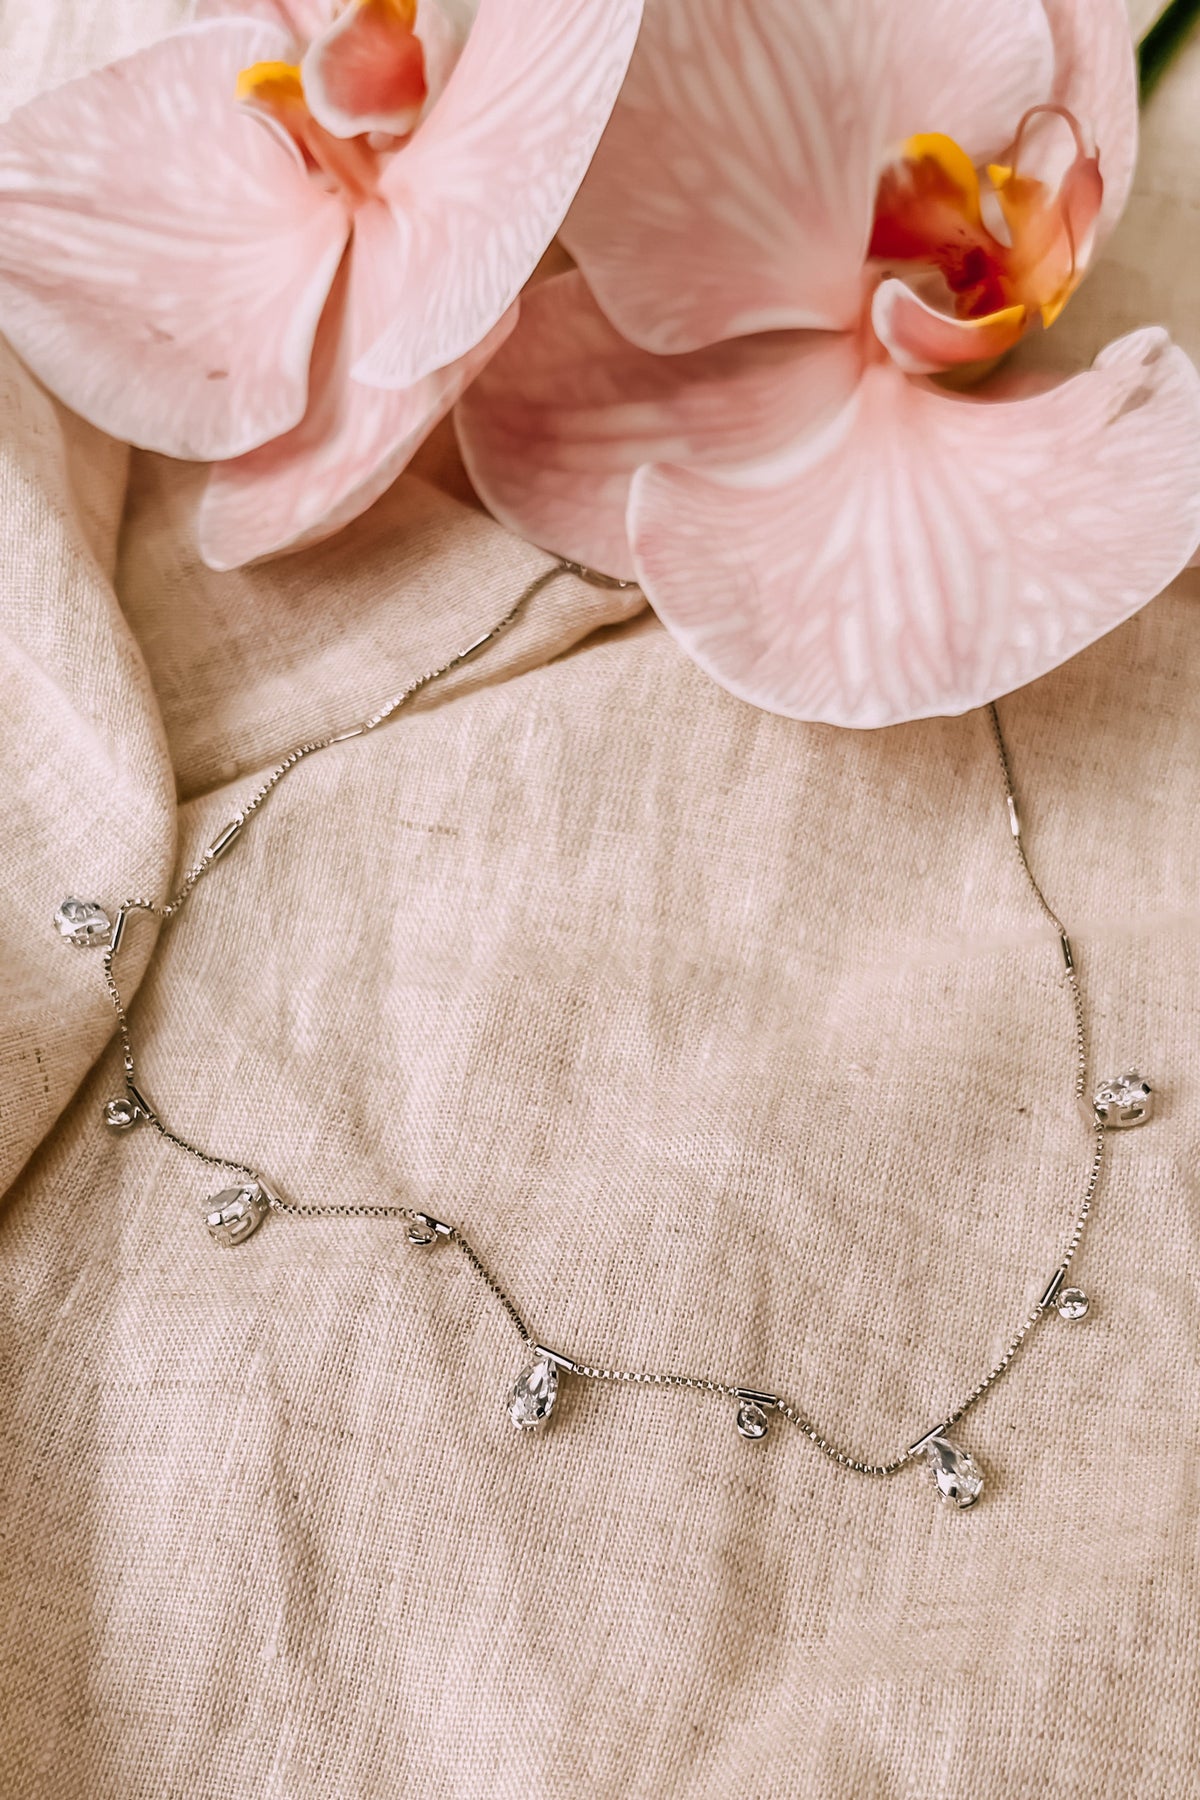  &quot;White gold-filled necklace with tear-drop charms and delicate chain design.&quot;